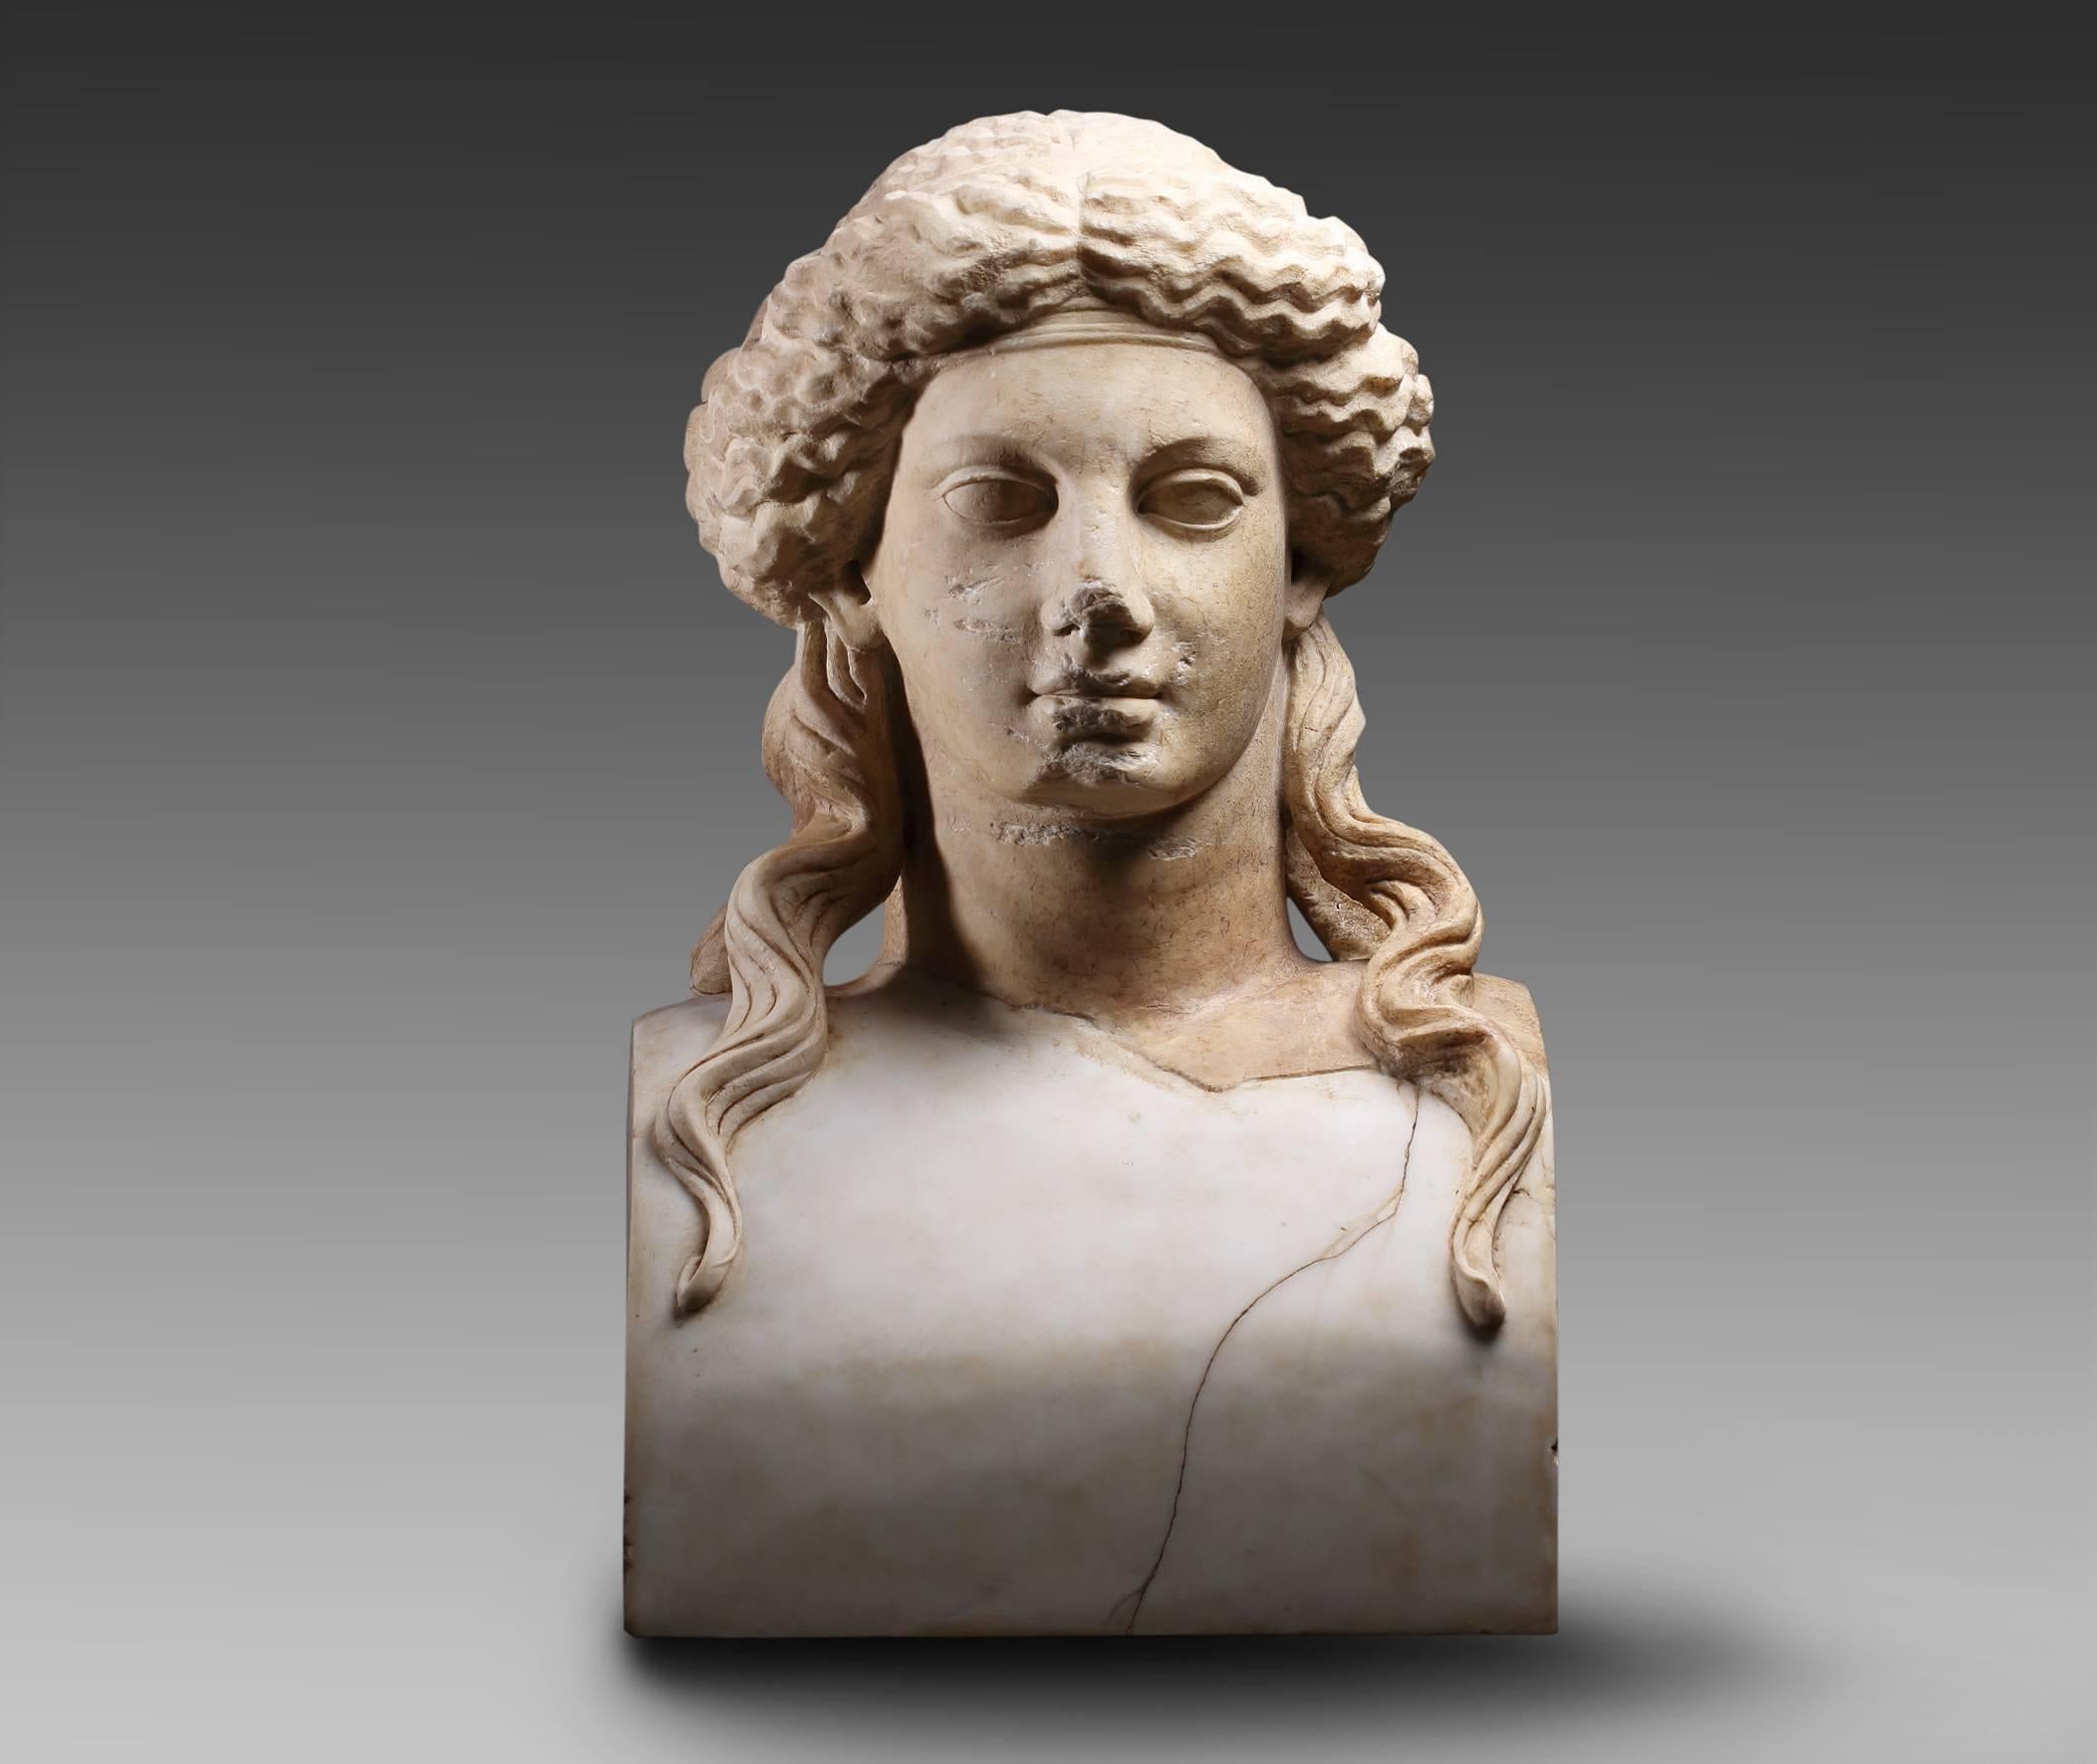 It is a Janiform Roman marble. It consists of two lifesize heads, substantially carved with idealized features.
The cheeks are rounded, the heads have large almond shaped eyes, the wavy hair is swept from their faces and tied in a net. Another net